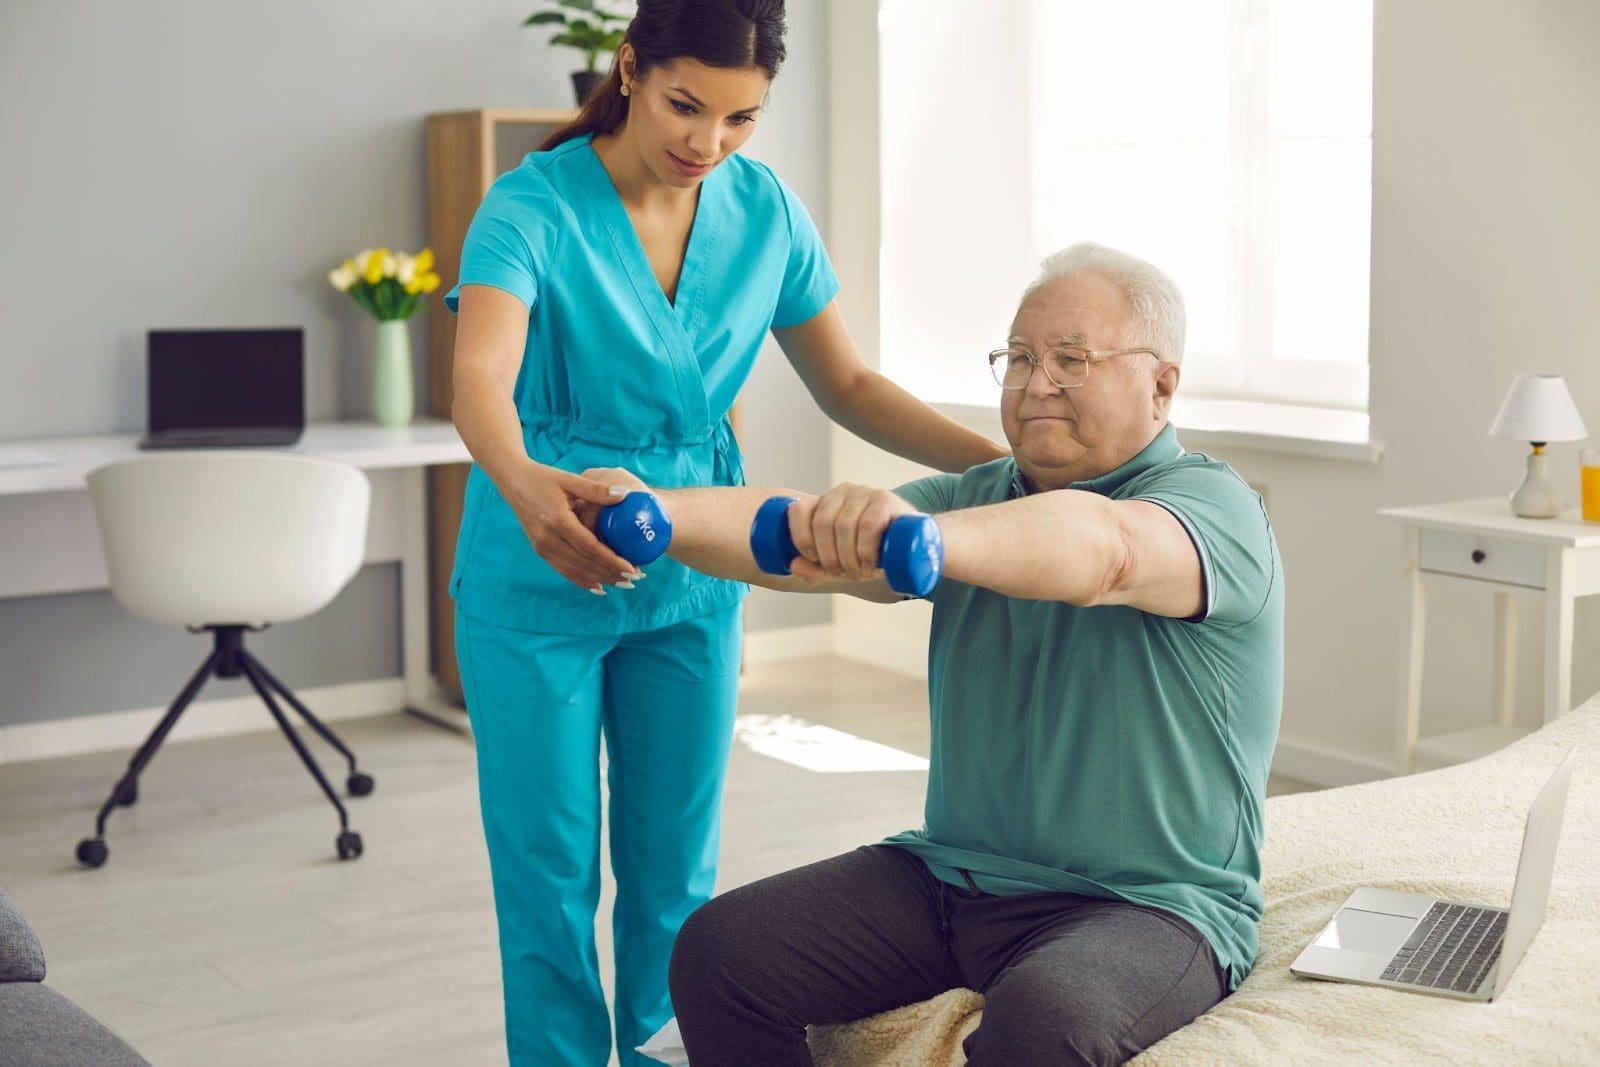 A chiropractor helps an older man with arm exercises using light dumbbells.